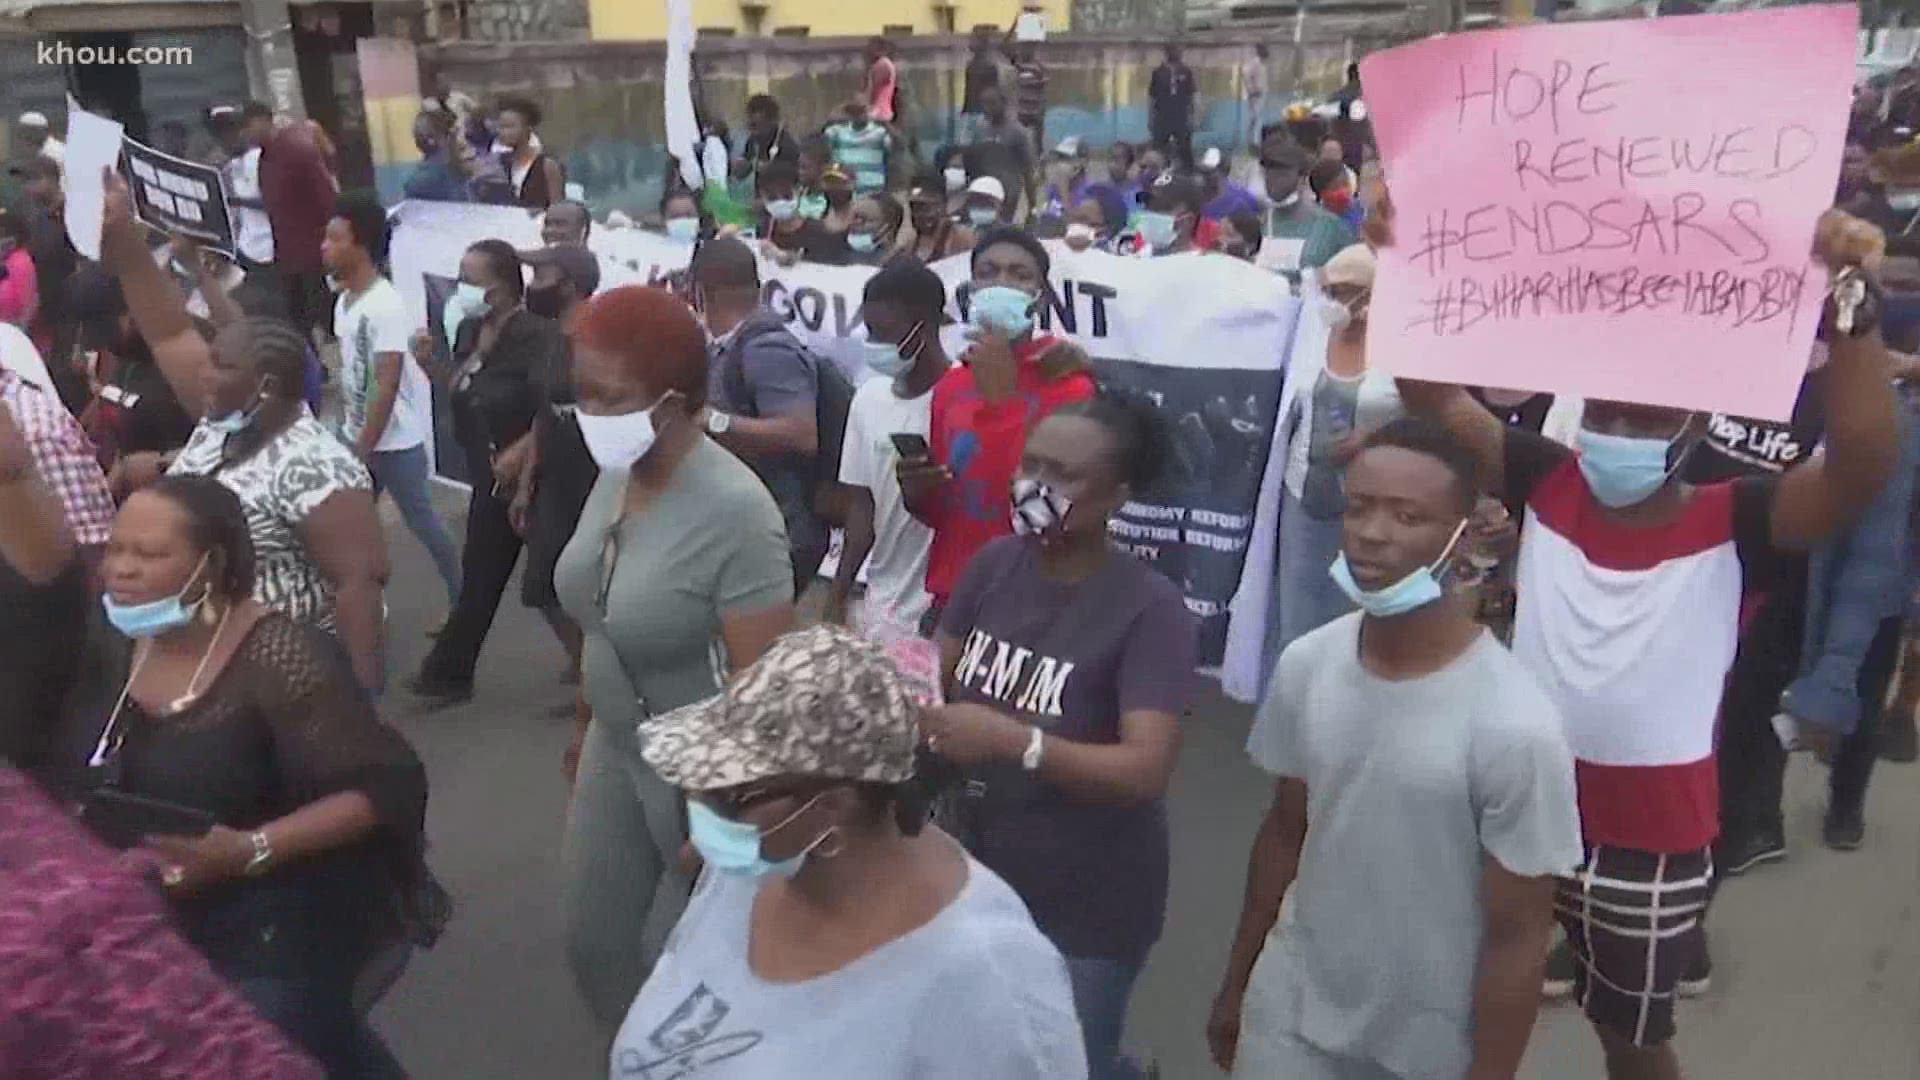 Thousands of Nigerians have demonstrated in the country every day for nearly two weeks against the police unit known as SARS. The protests have even reached the U.S.